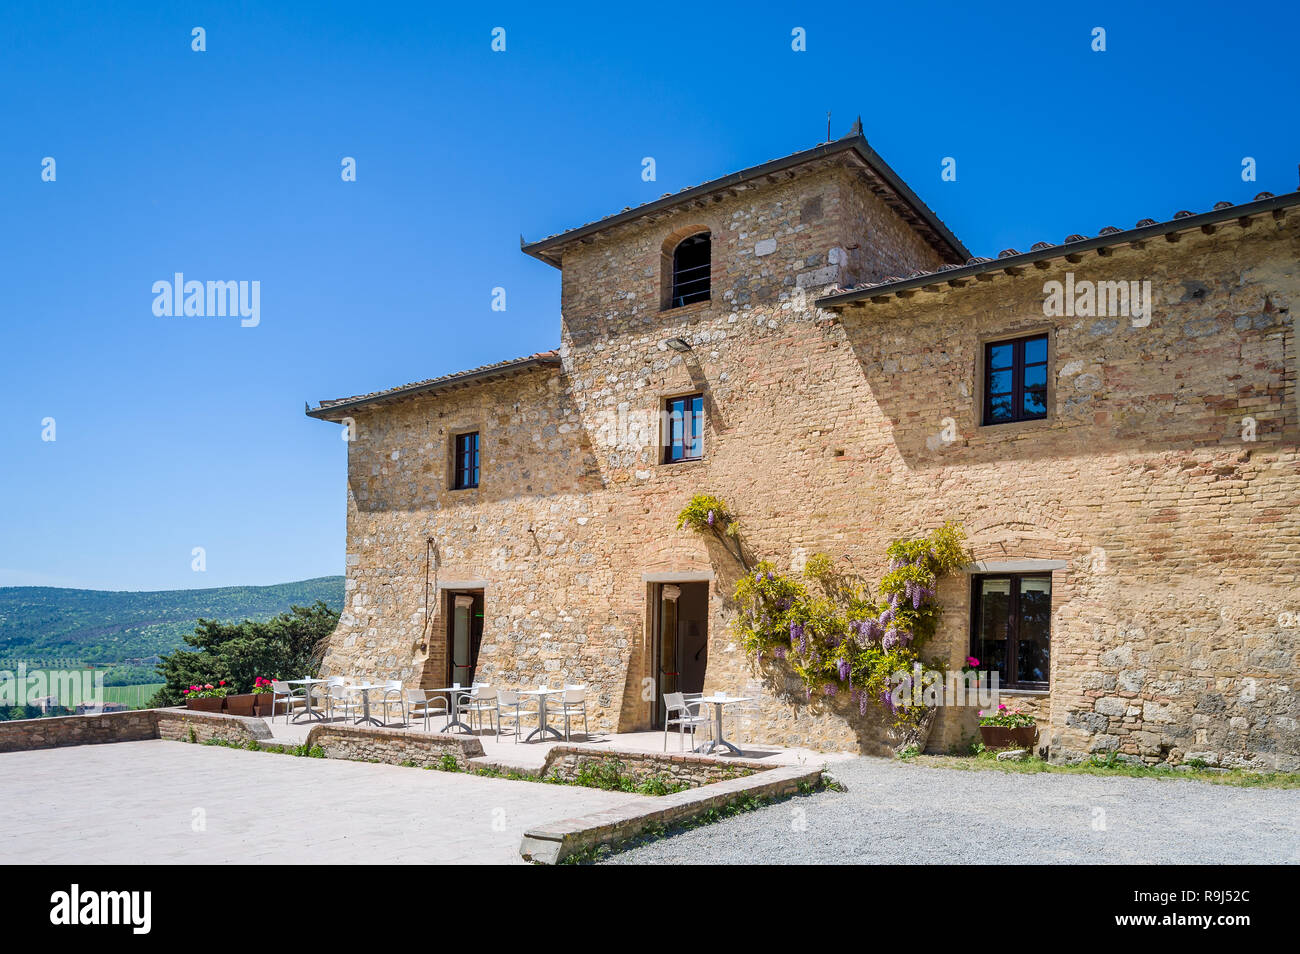 Old buildings and viewpoint of San Gimignano. Toscana region, Italy. Stock Photo